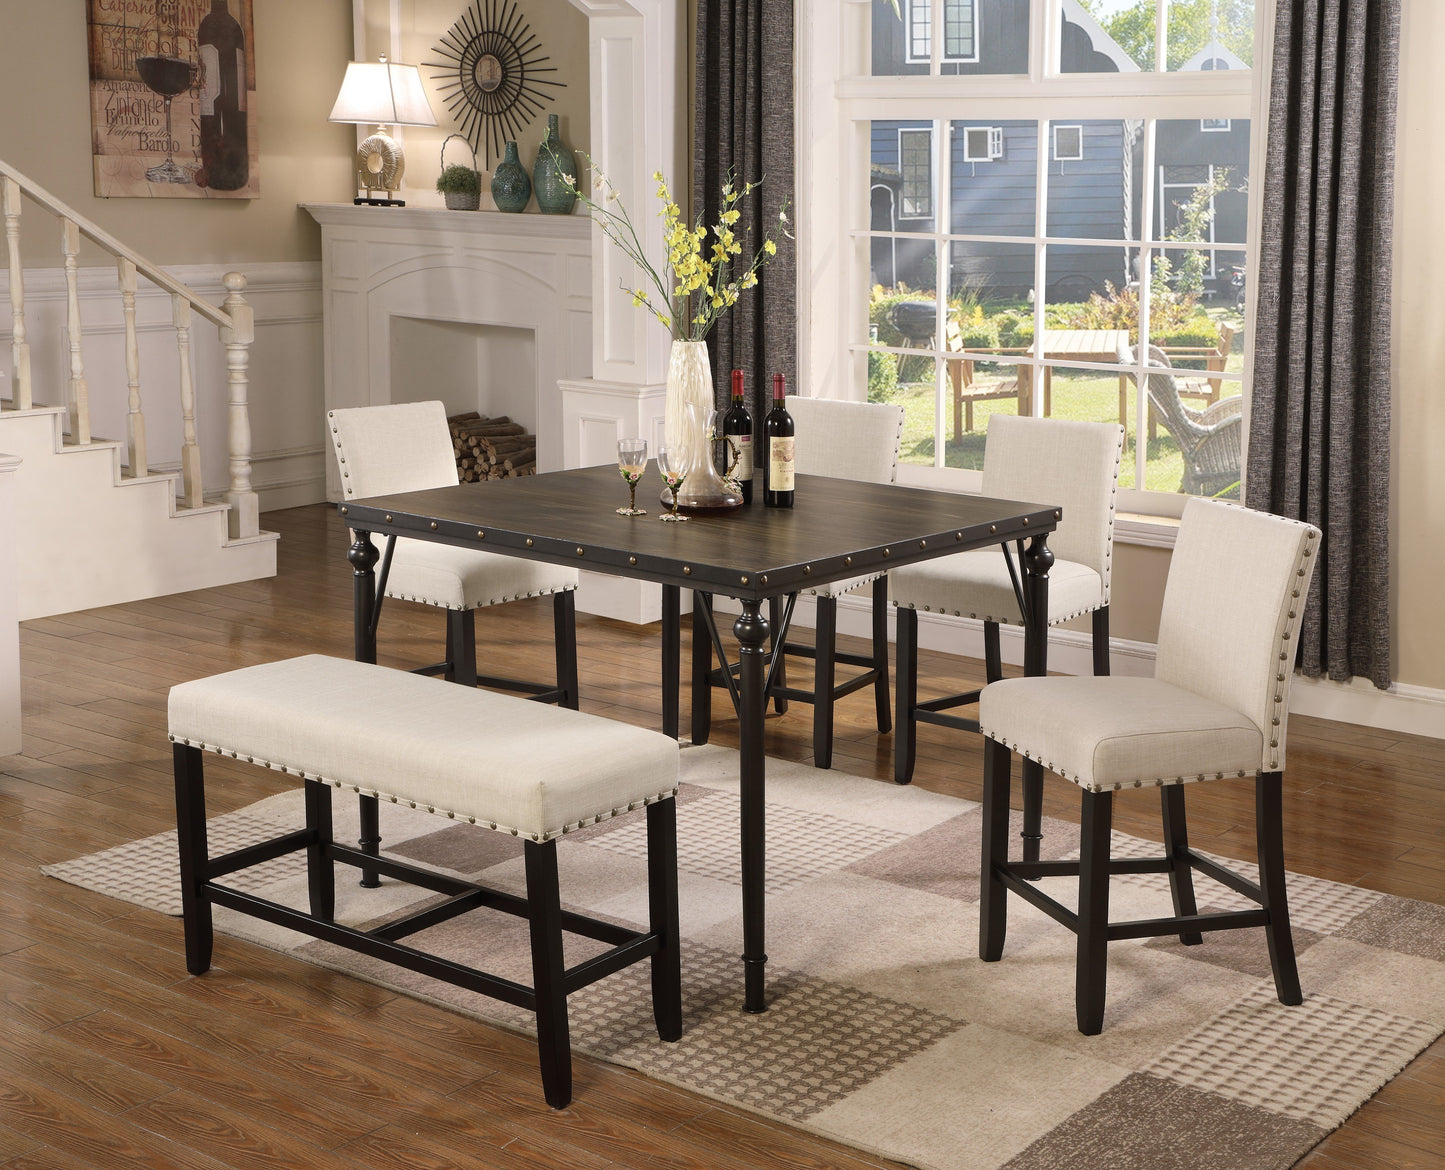 Biony Counter Height 6-Piece Espresso Wood Dining Set with Tan Fabric Nailhead Chairs and Pub Bench